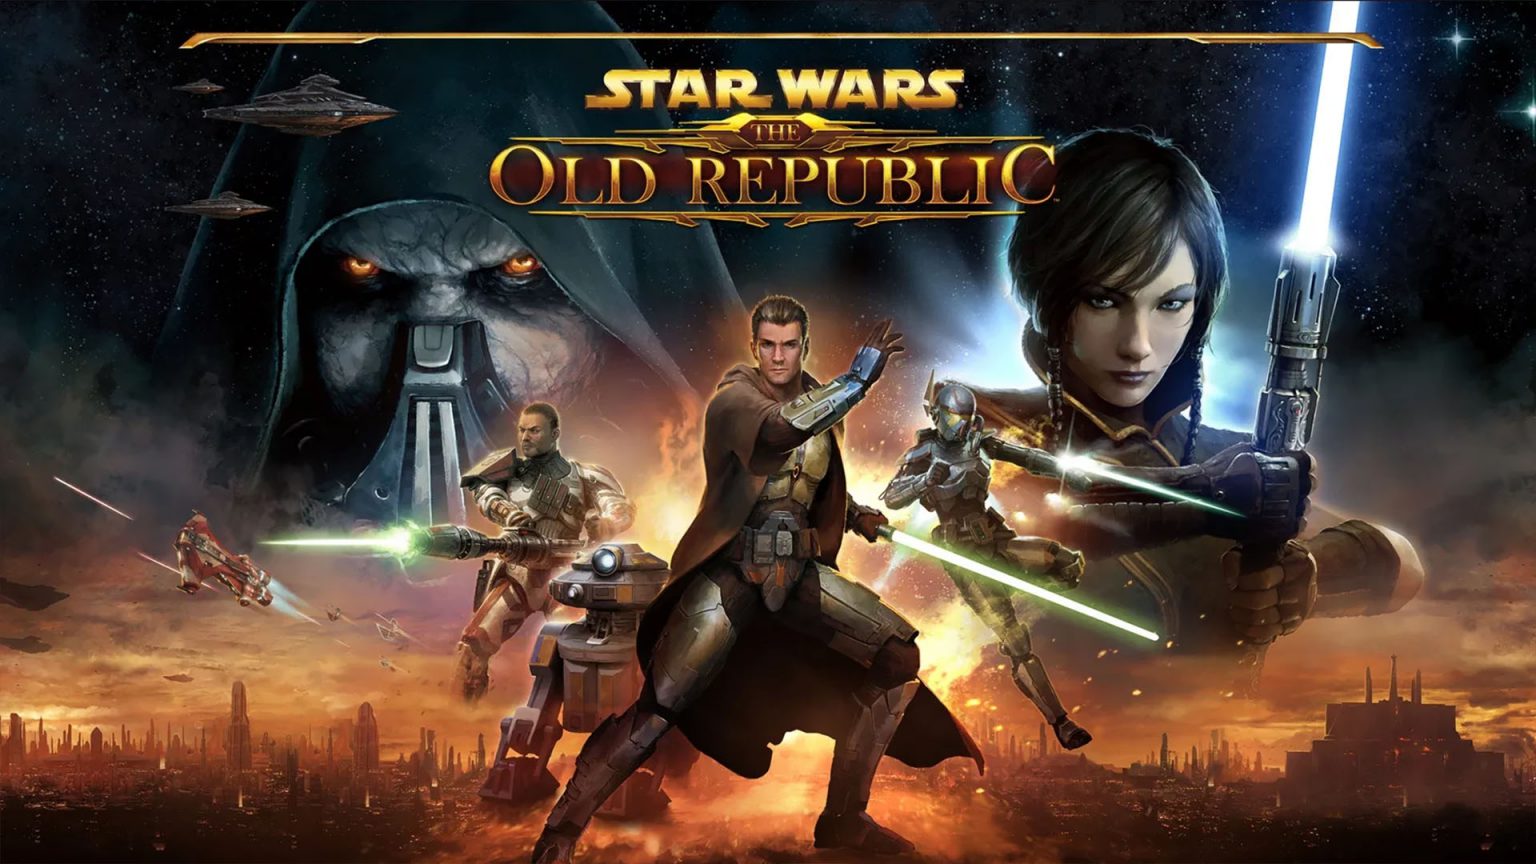 Star Wars The old republic